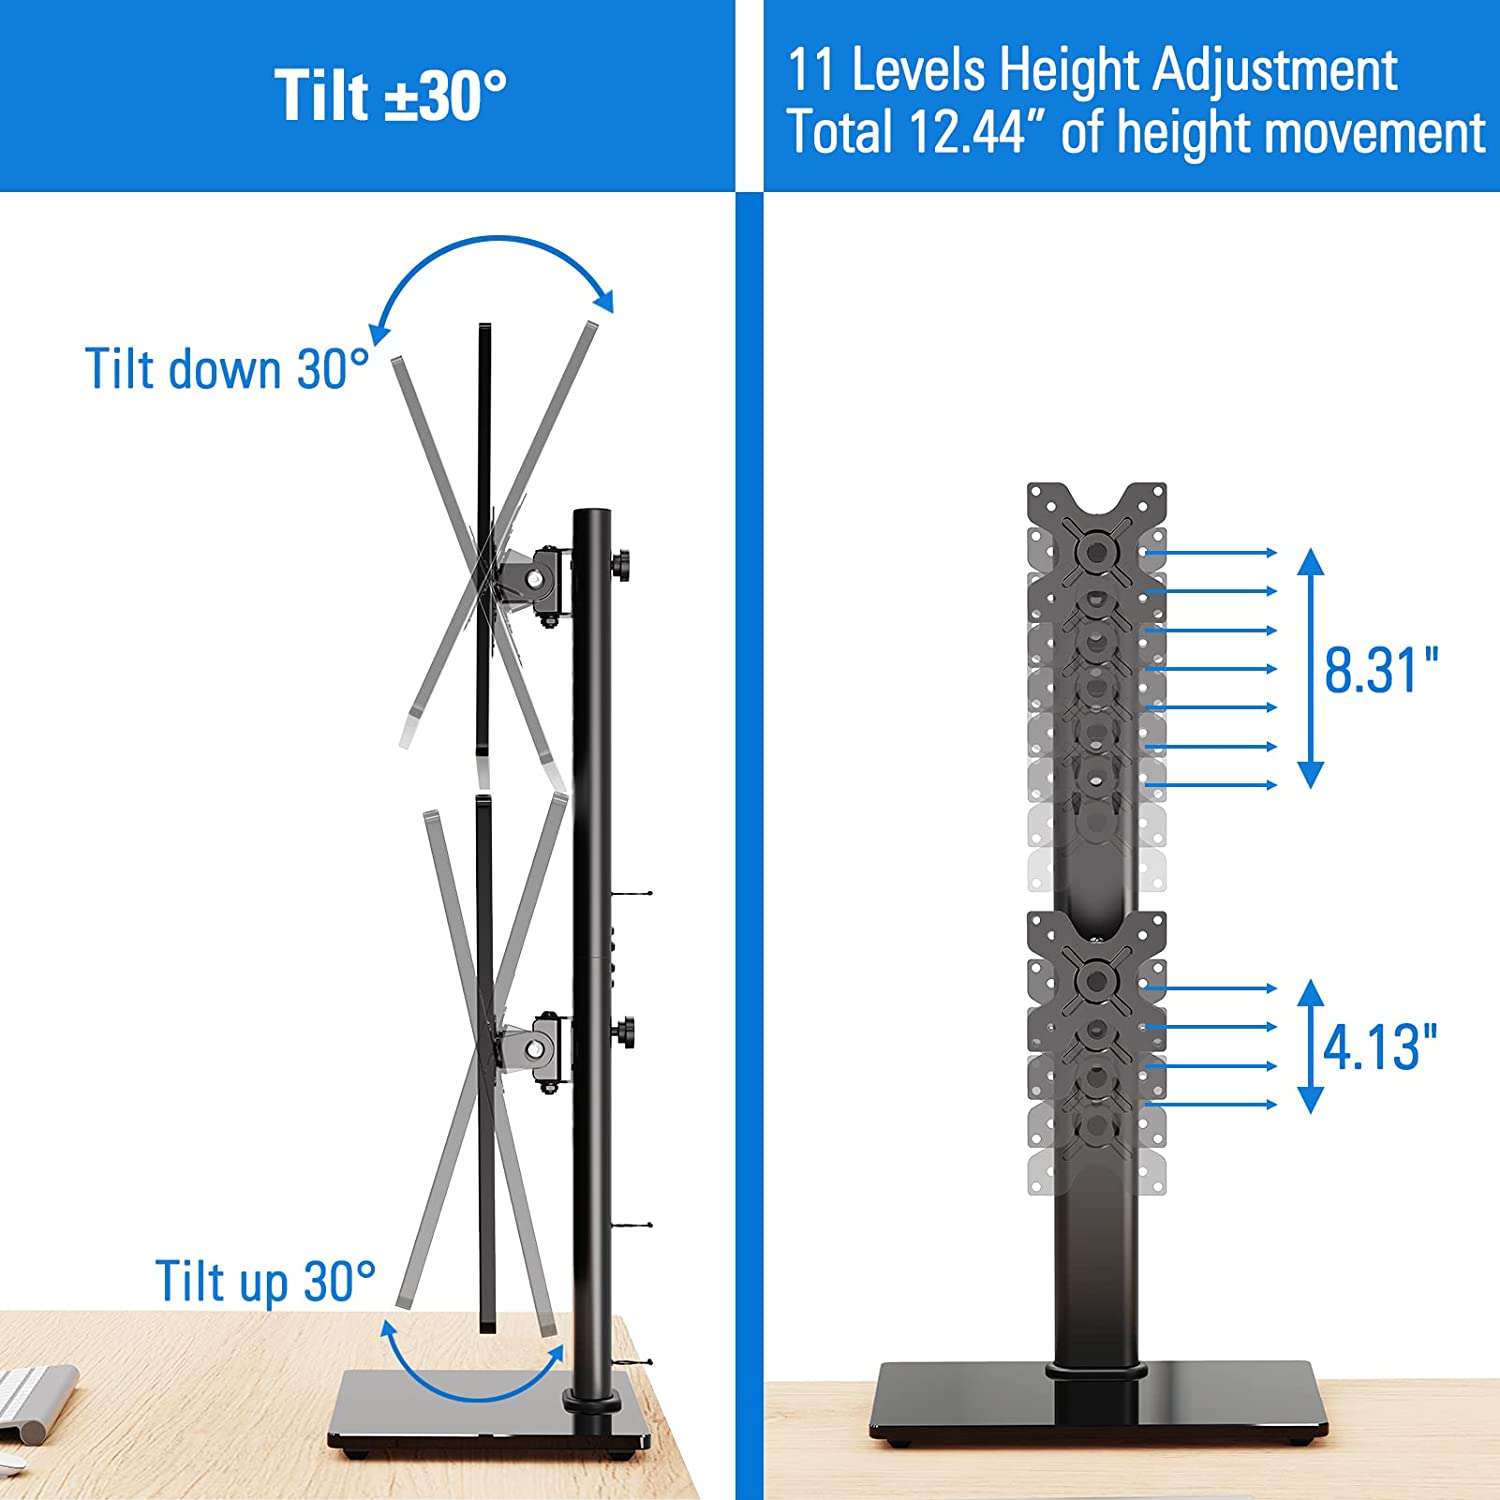 Dual monitor desk stand tilts monitor up or down to reduce glare